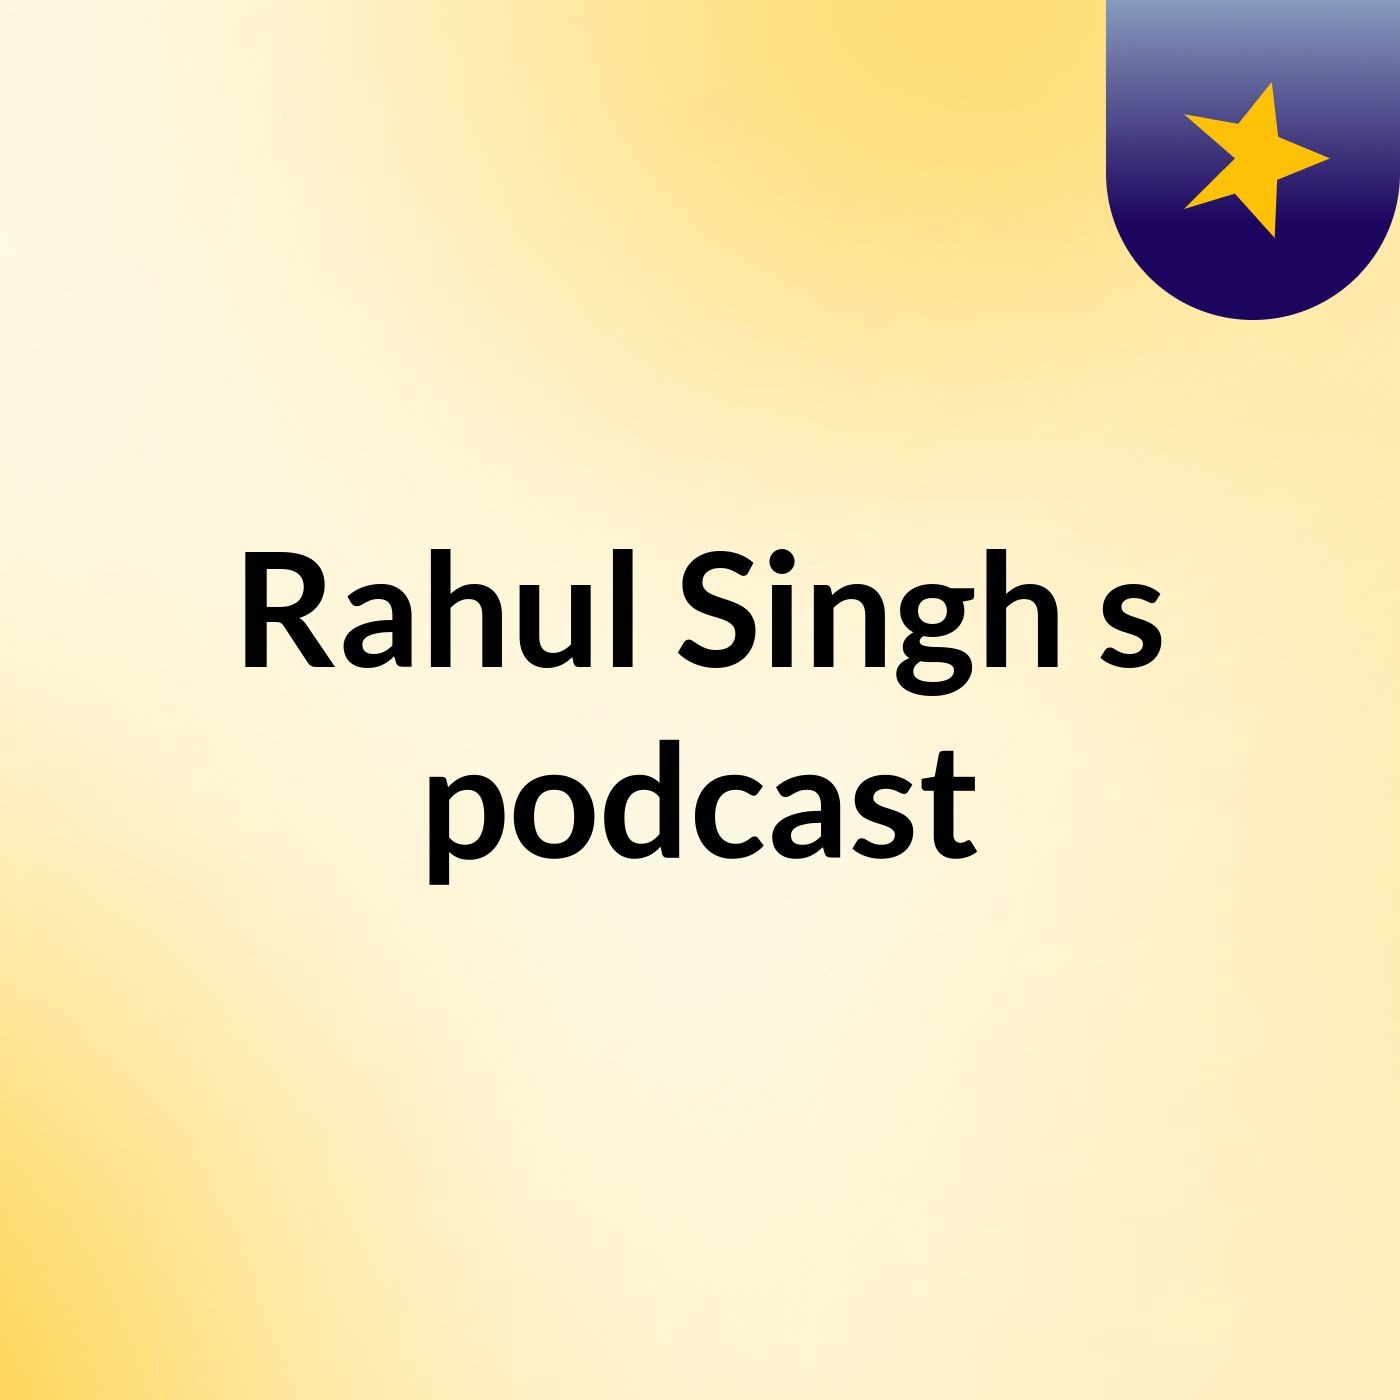 Episode 2 - Rahul Singh's podcast